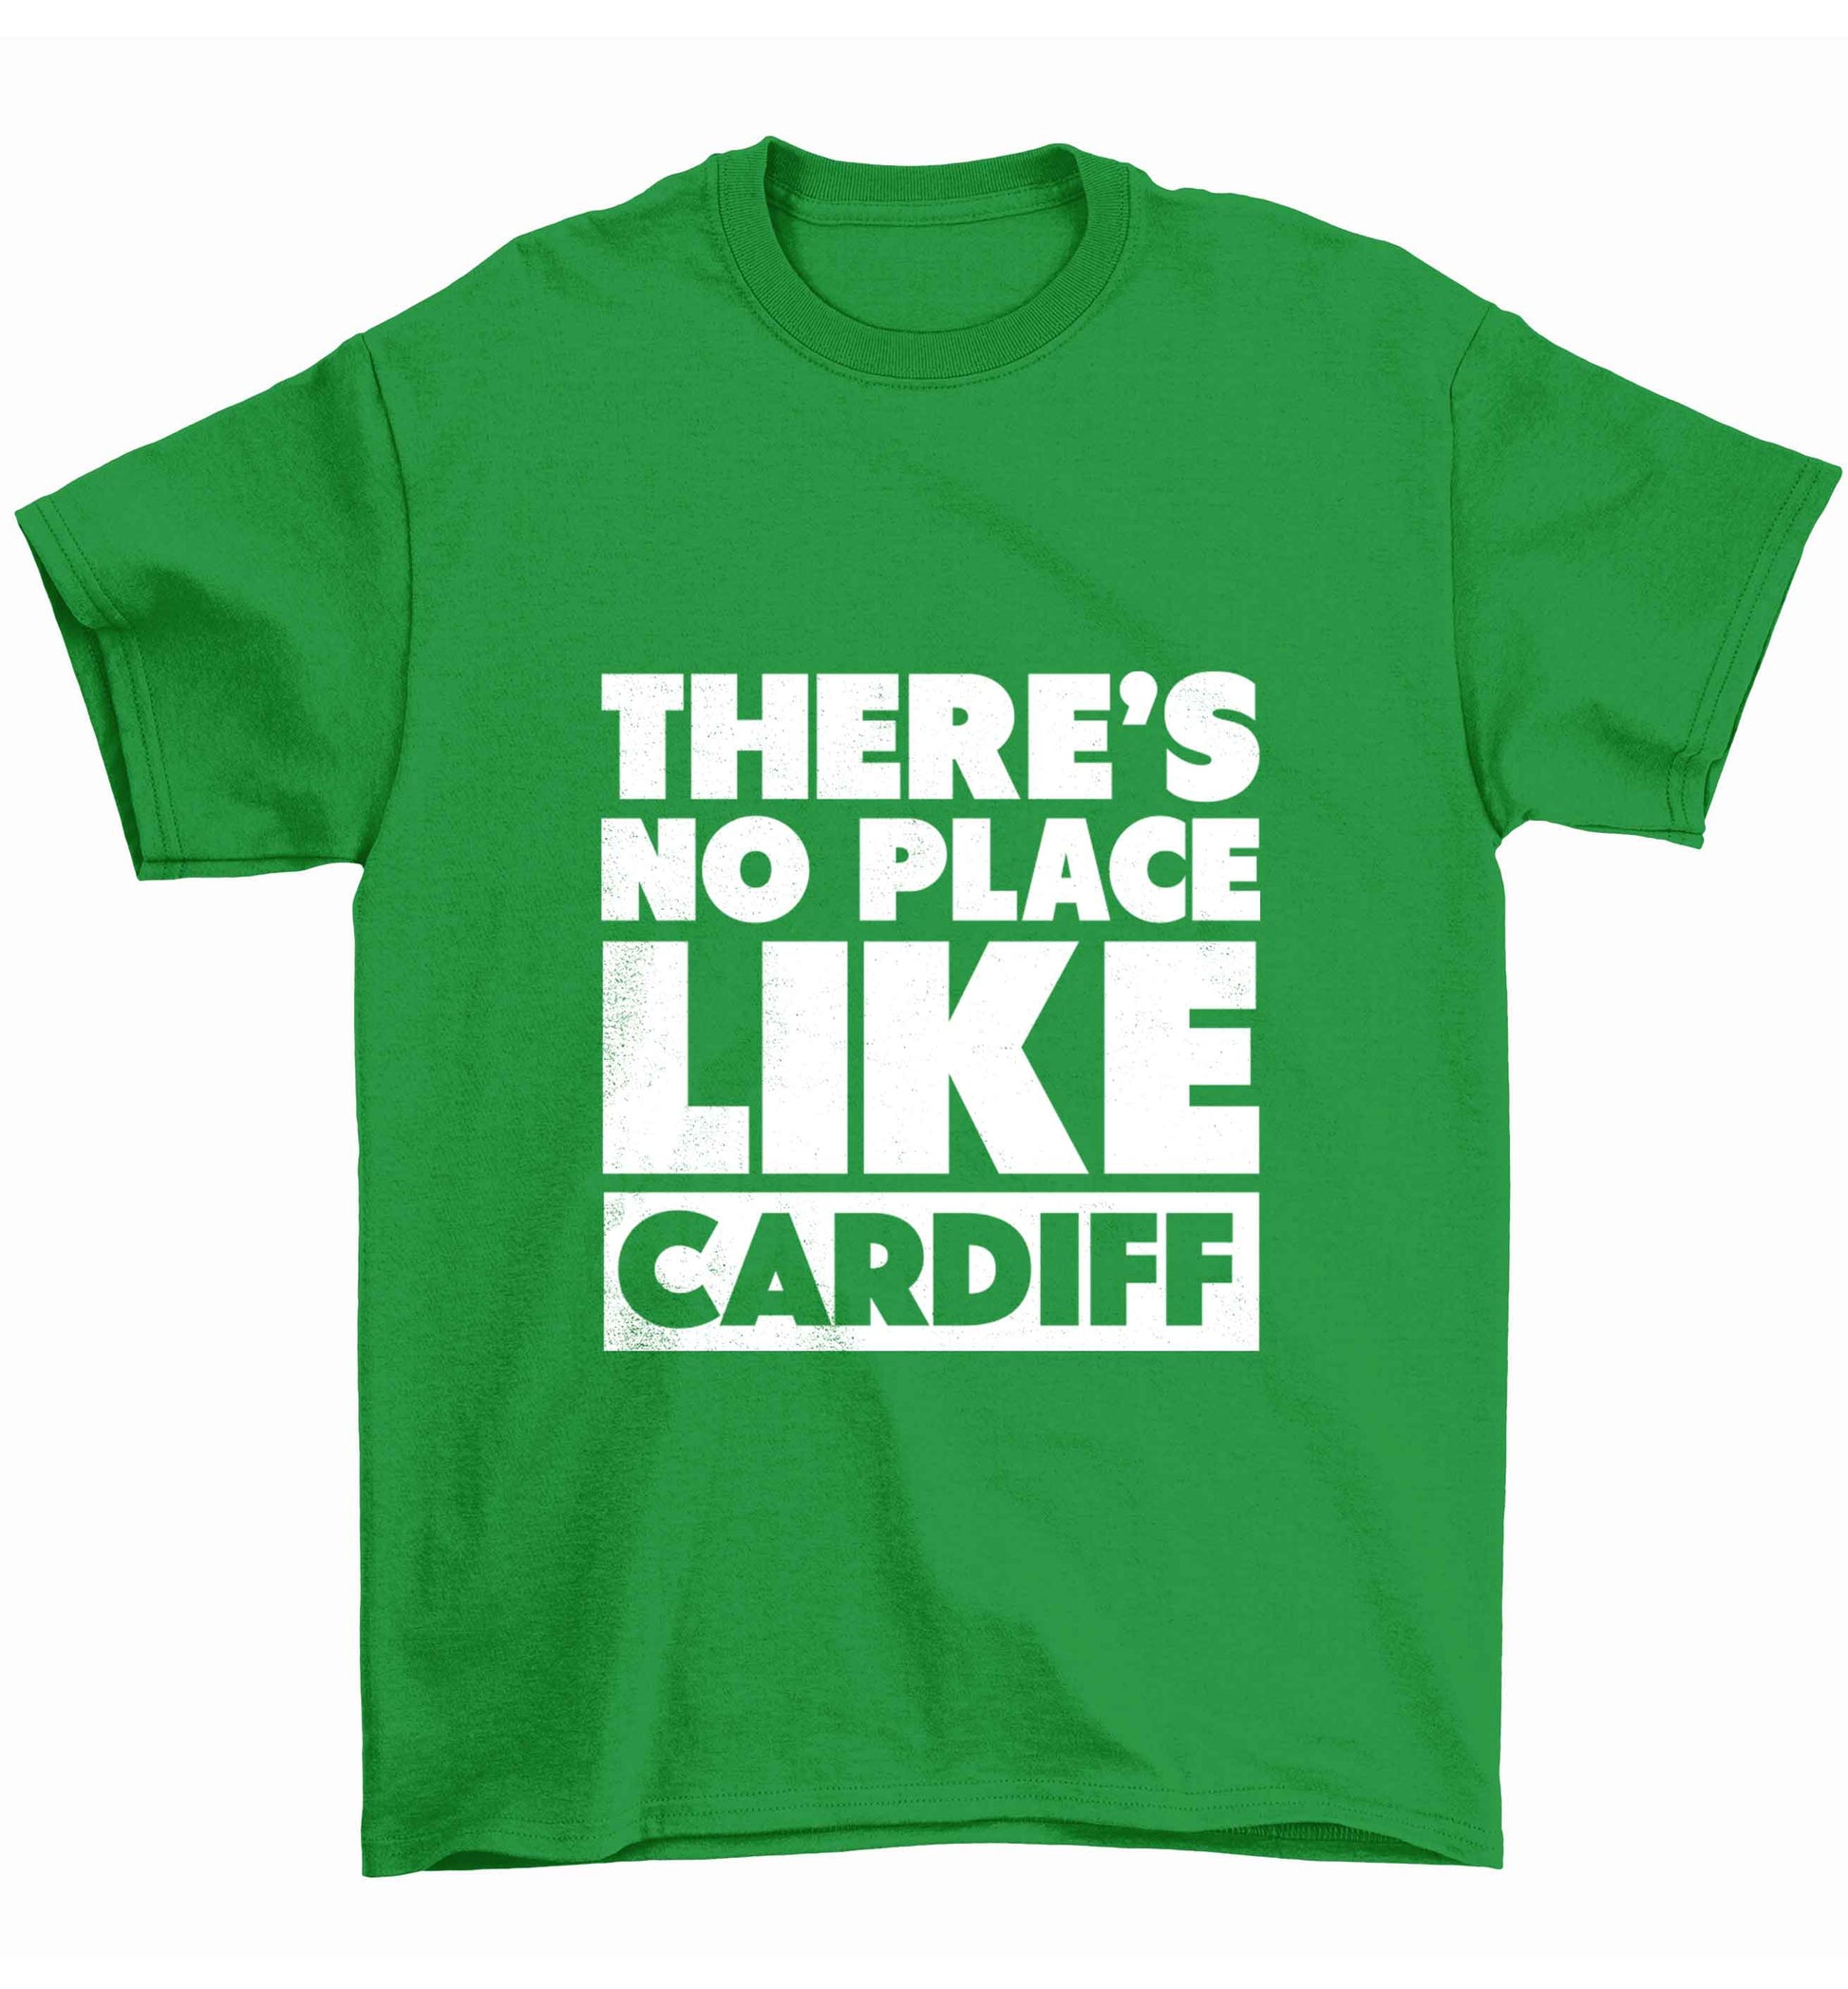 There's no place like Cardiff Children's green Tshirt 12-13 Years